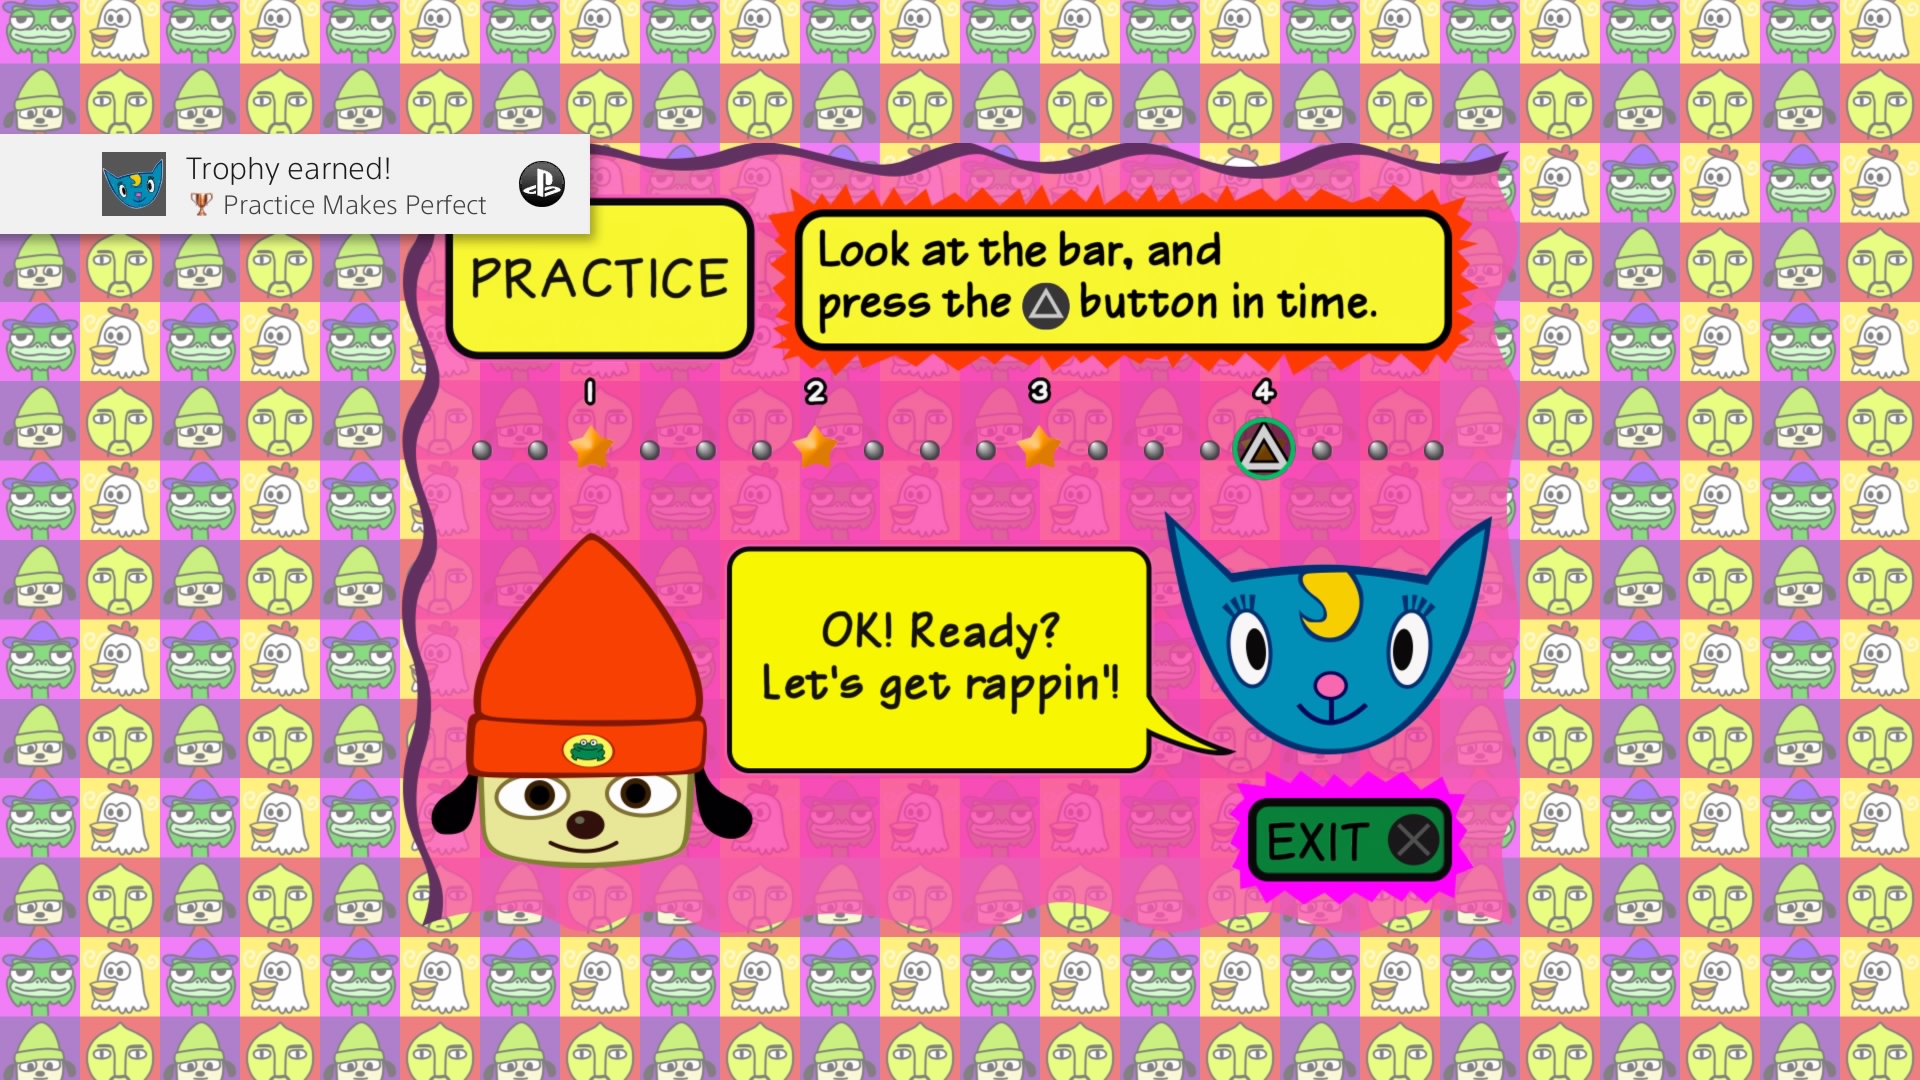 PlayStation 2 - PaRappa the Rapper 2 - File Save Icons - The Textures  Resource